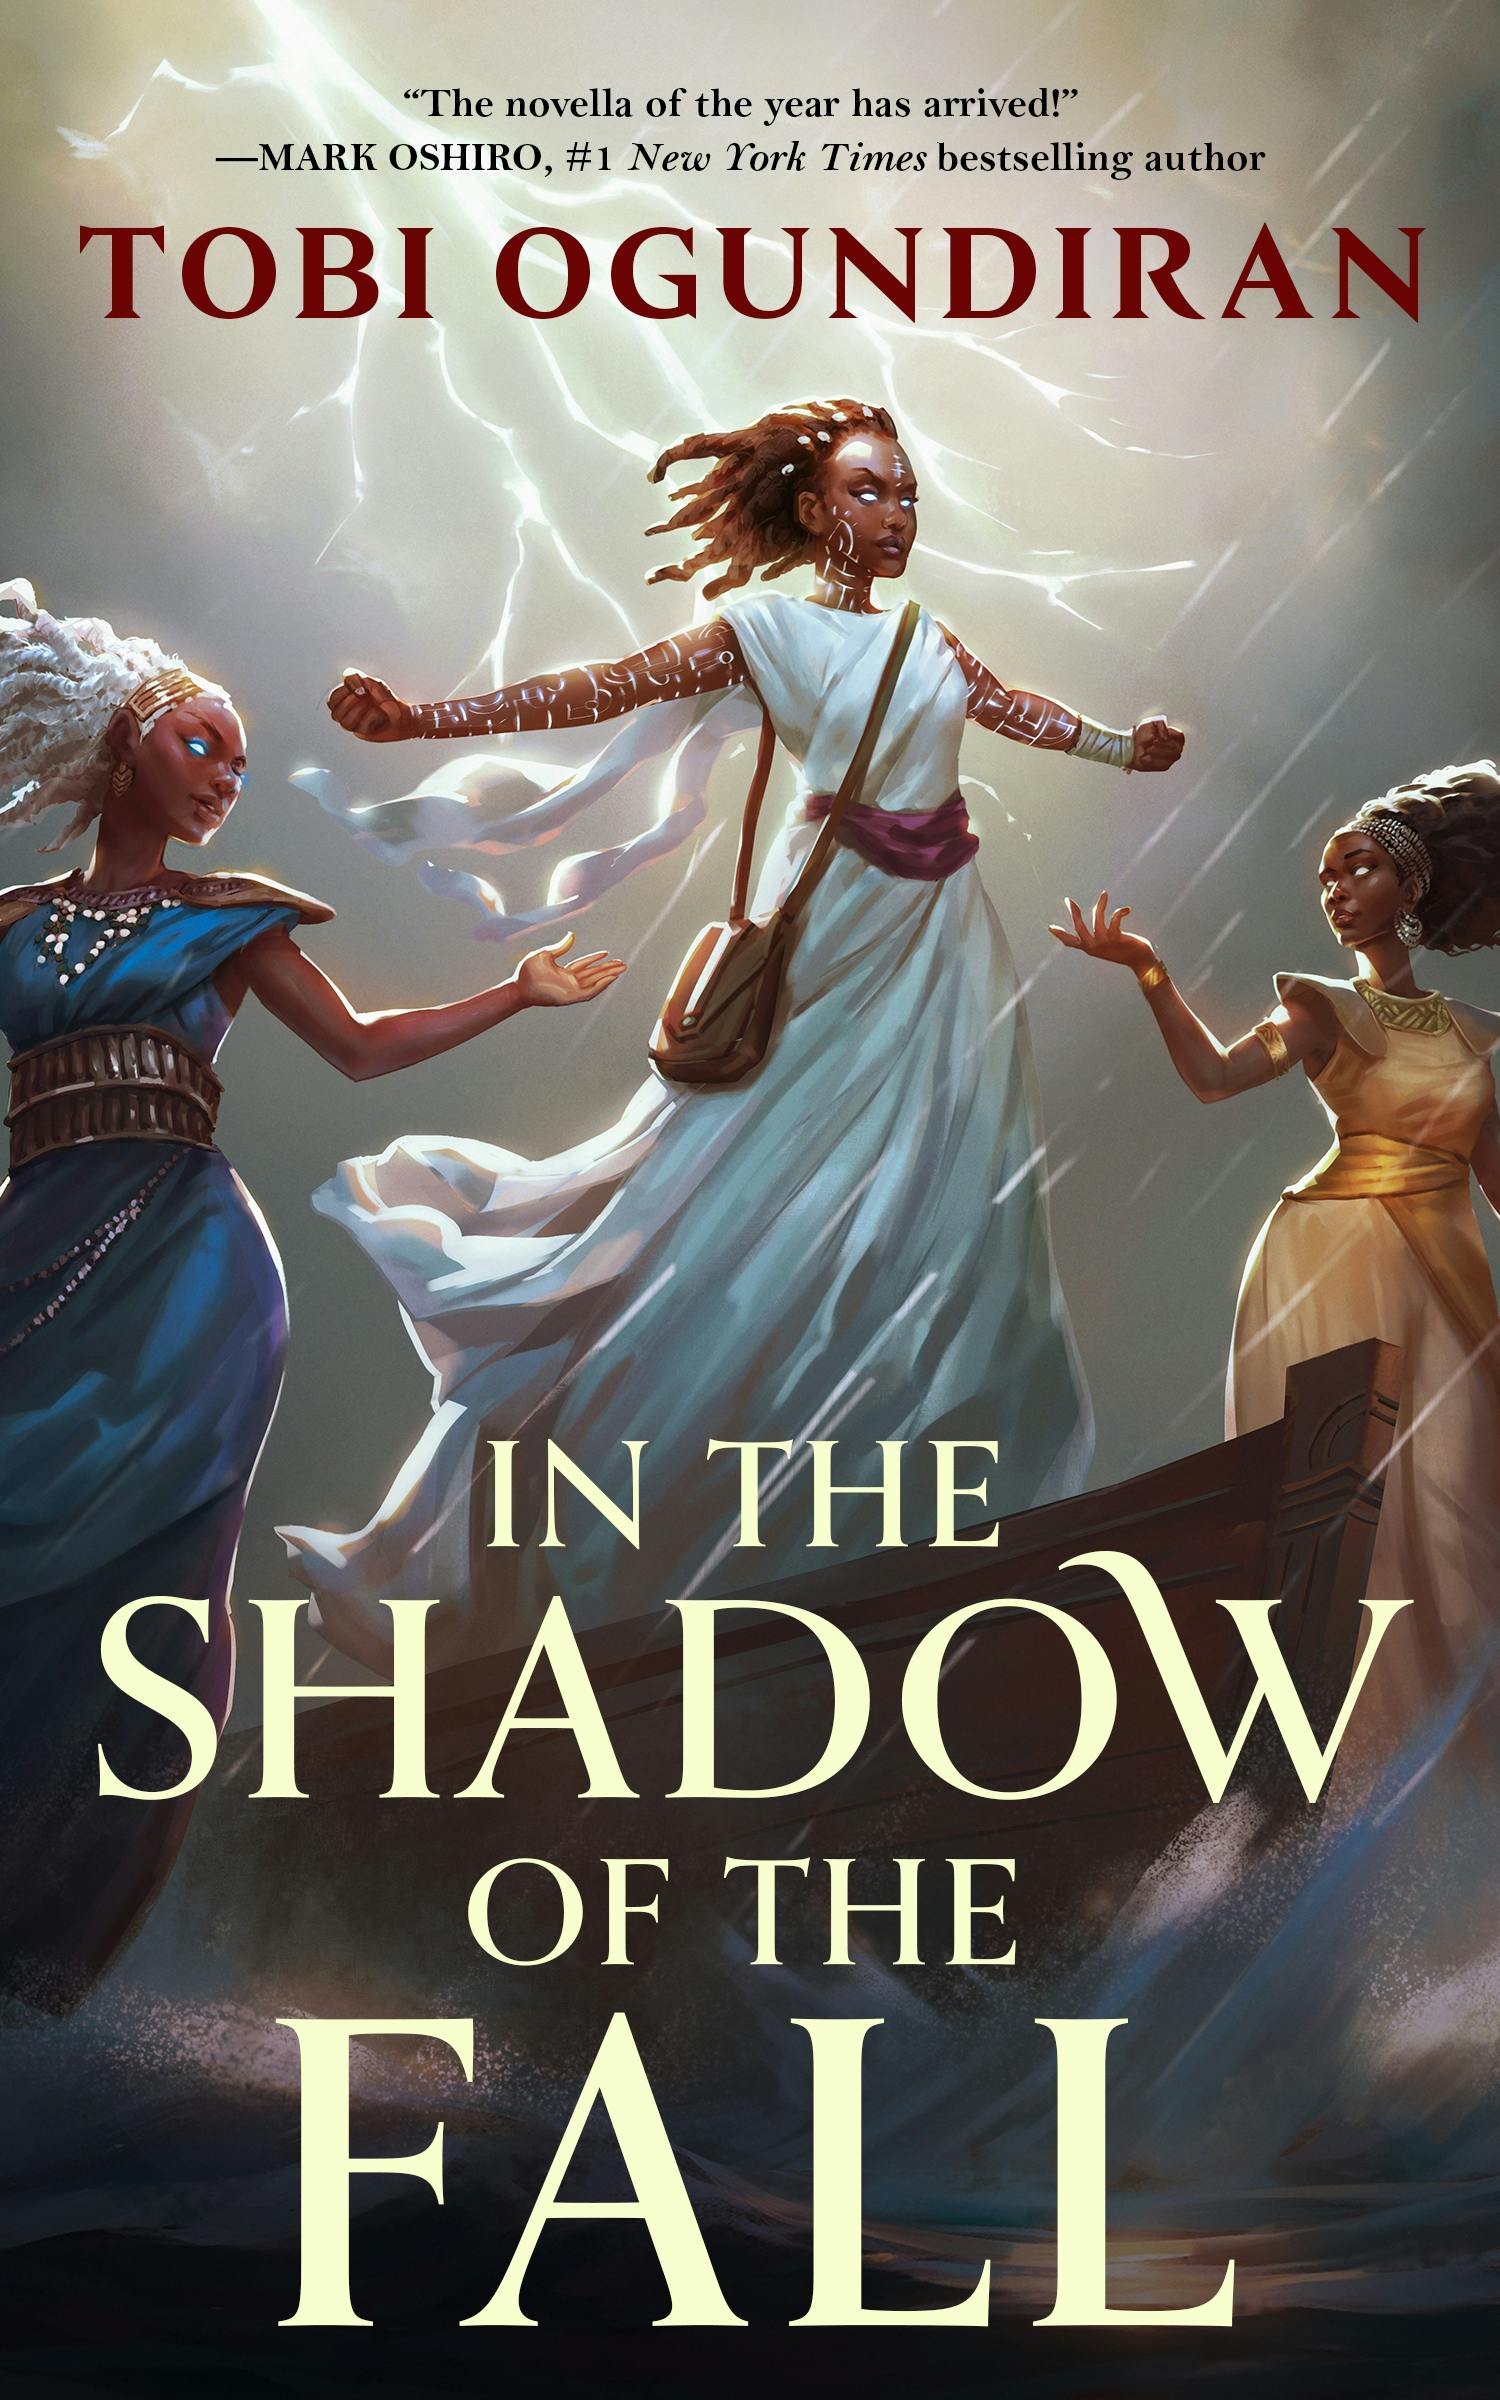 Cover for the book titled as: In the Shadow of the Fall